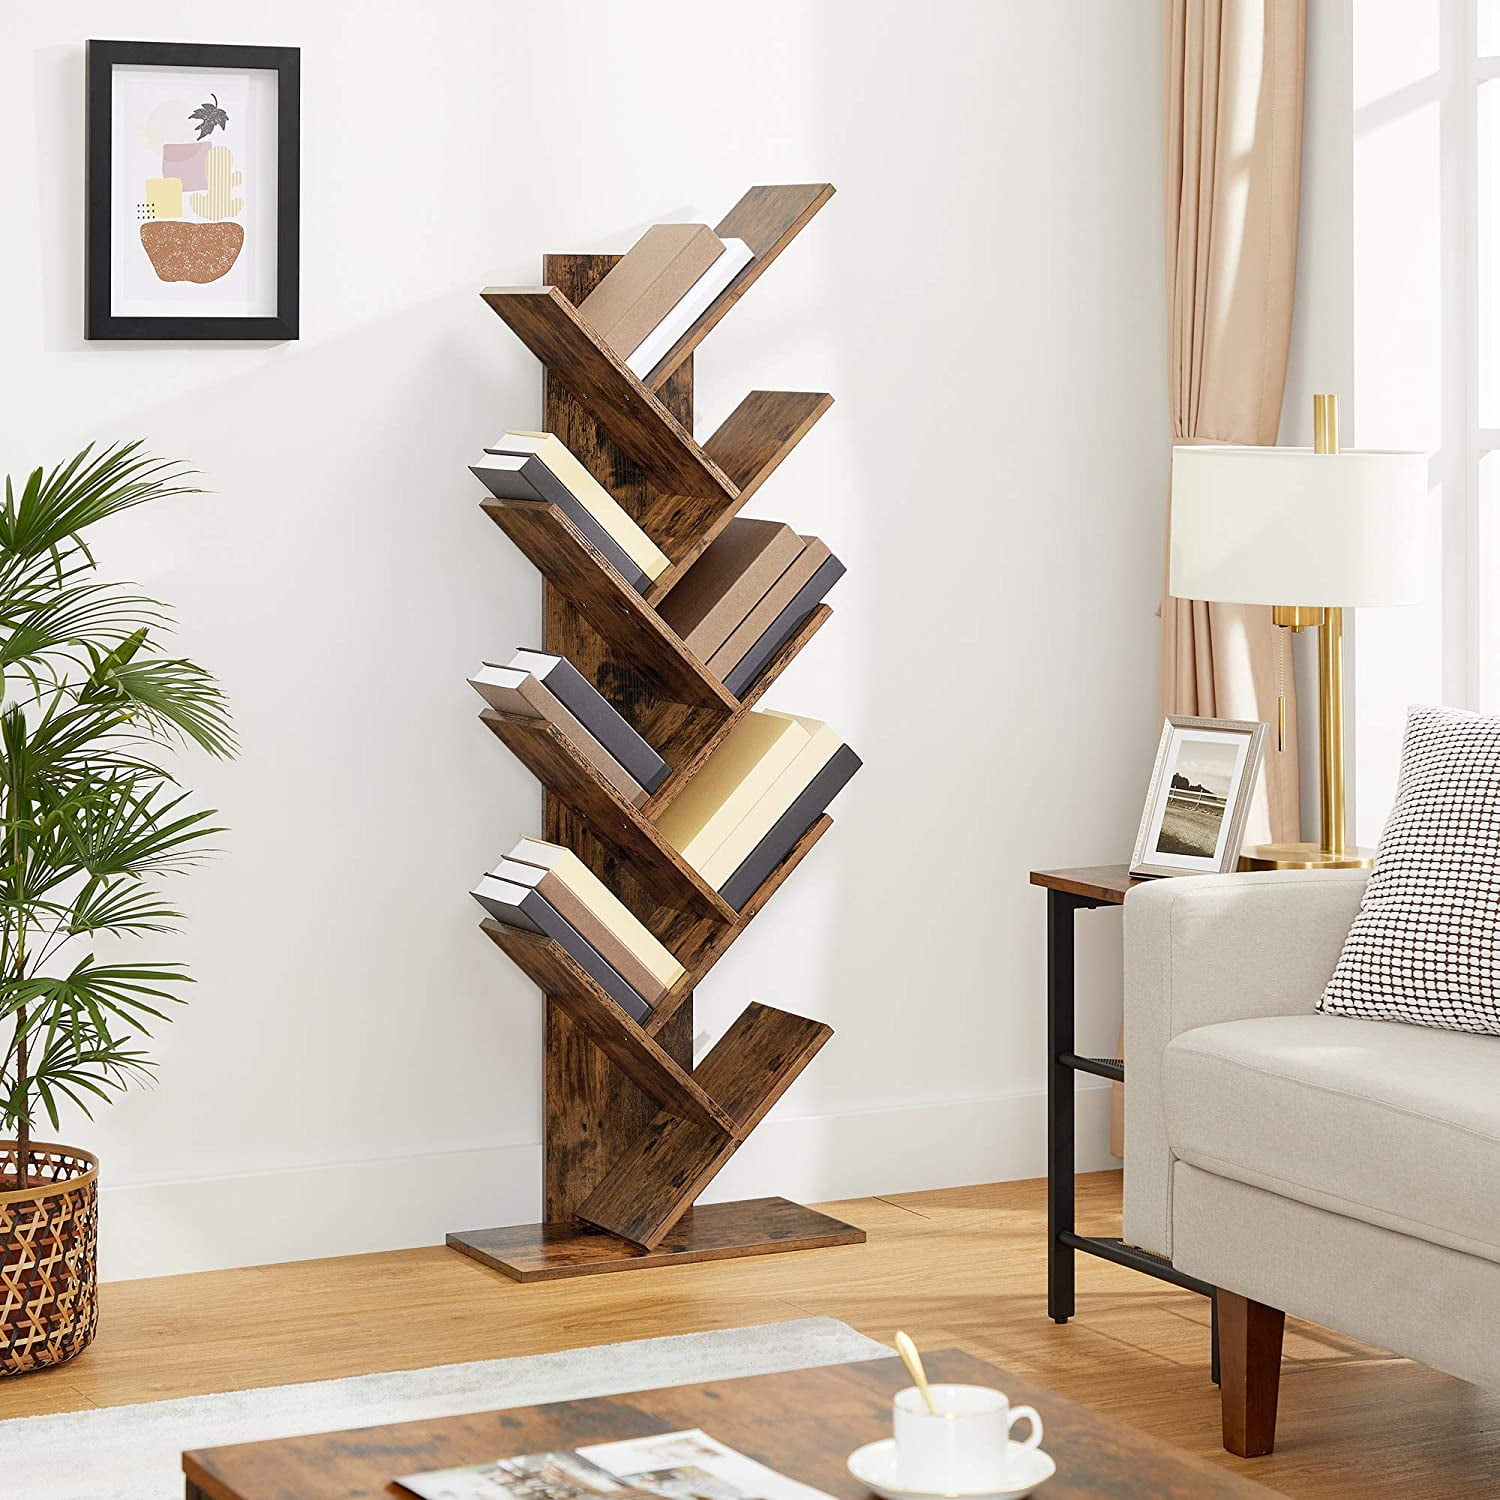 Color : B Tree Bookshelf Home Office Detachable Free Standing Bookshelves 8 Tier Floor Standing Bookcase with Wooden Shelves and Drawer for Living Room